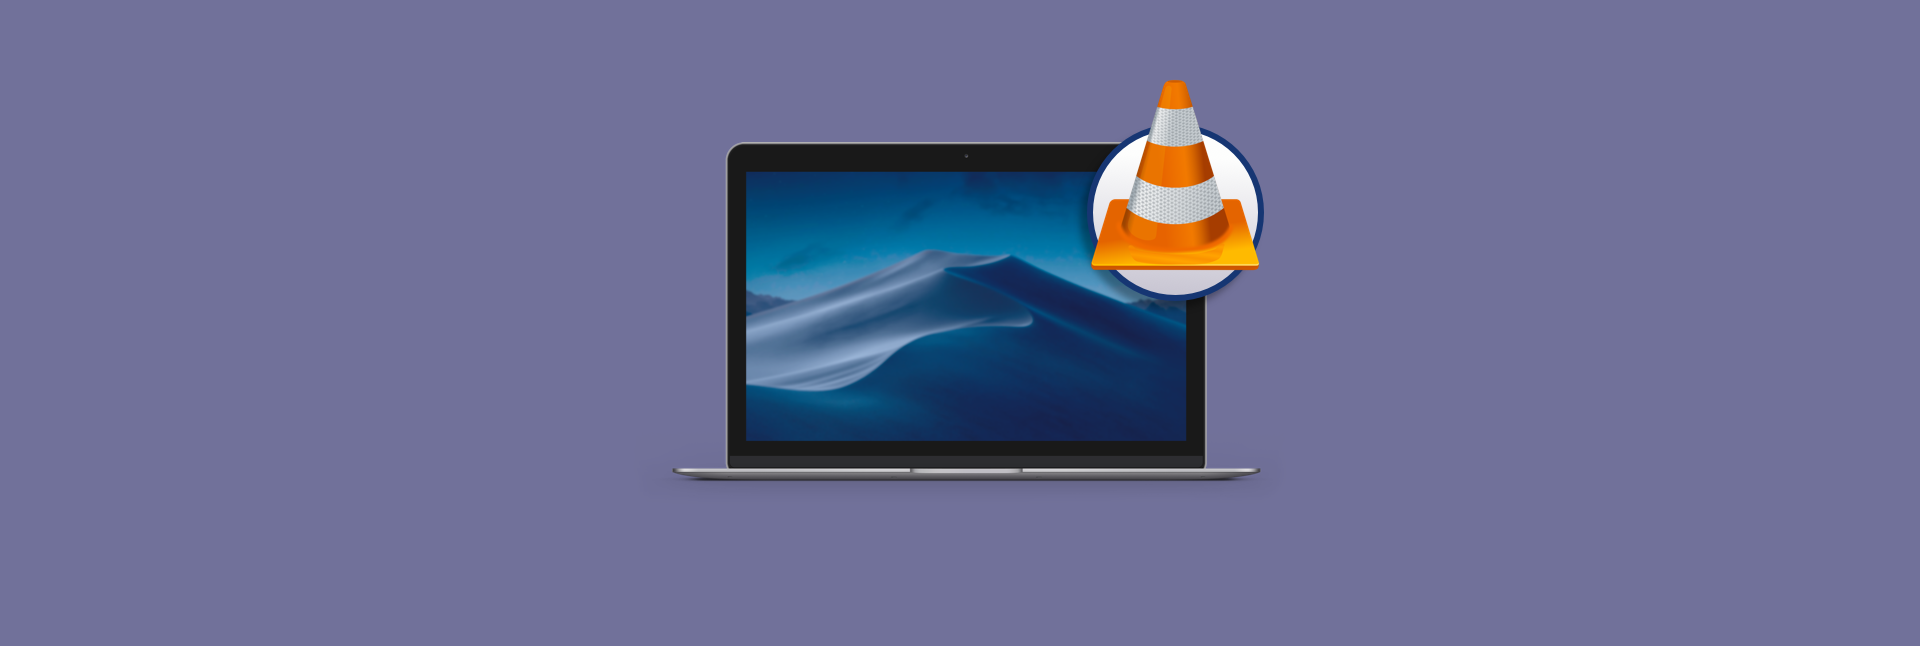 vlc download for mac 10.4.11